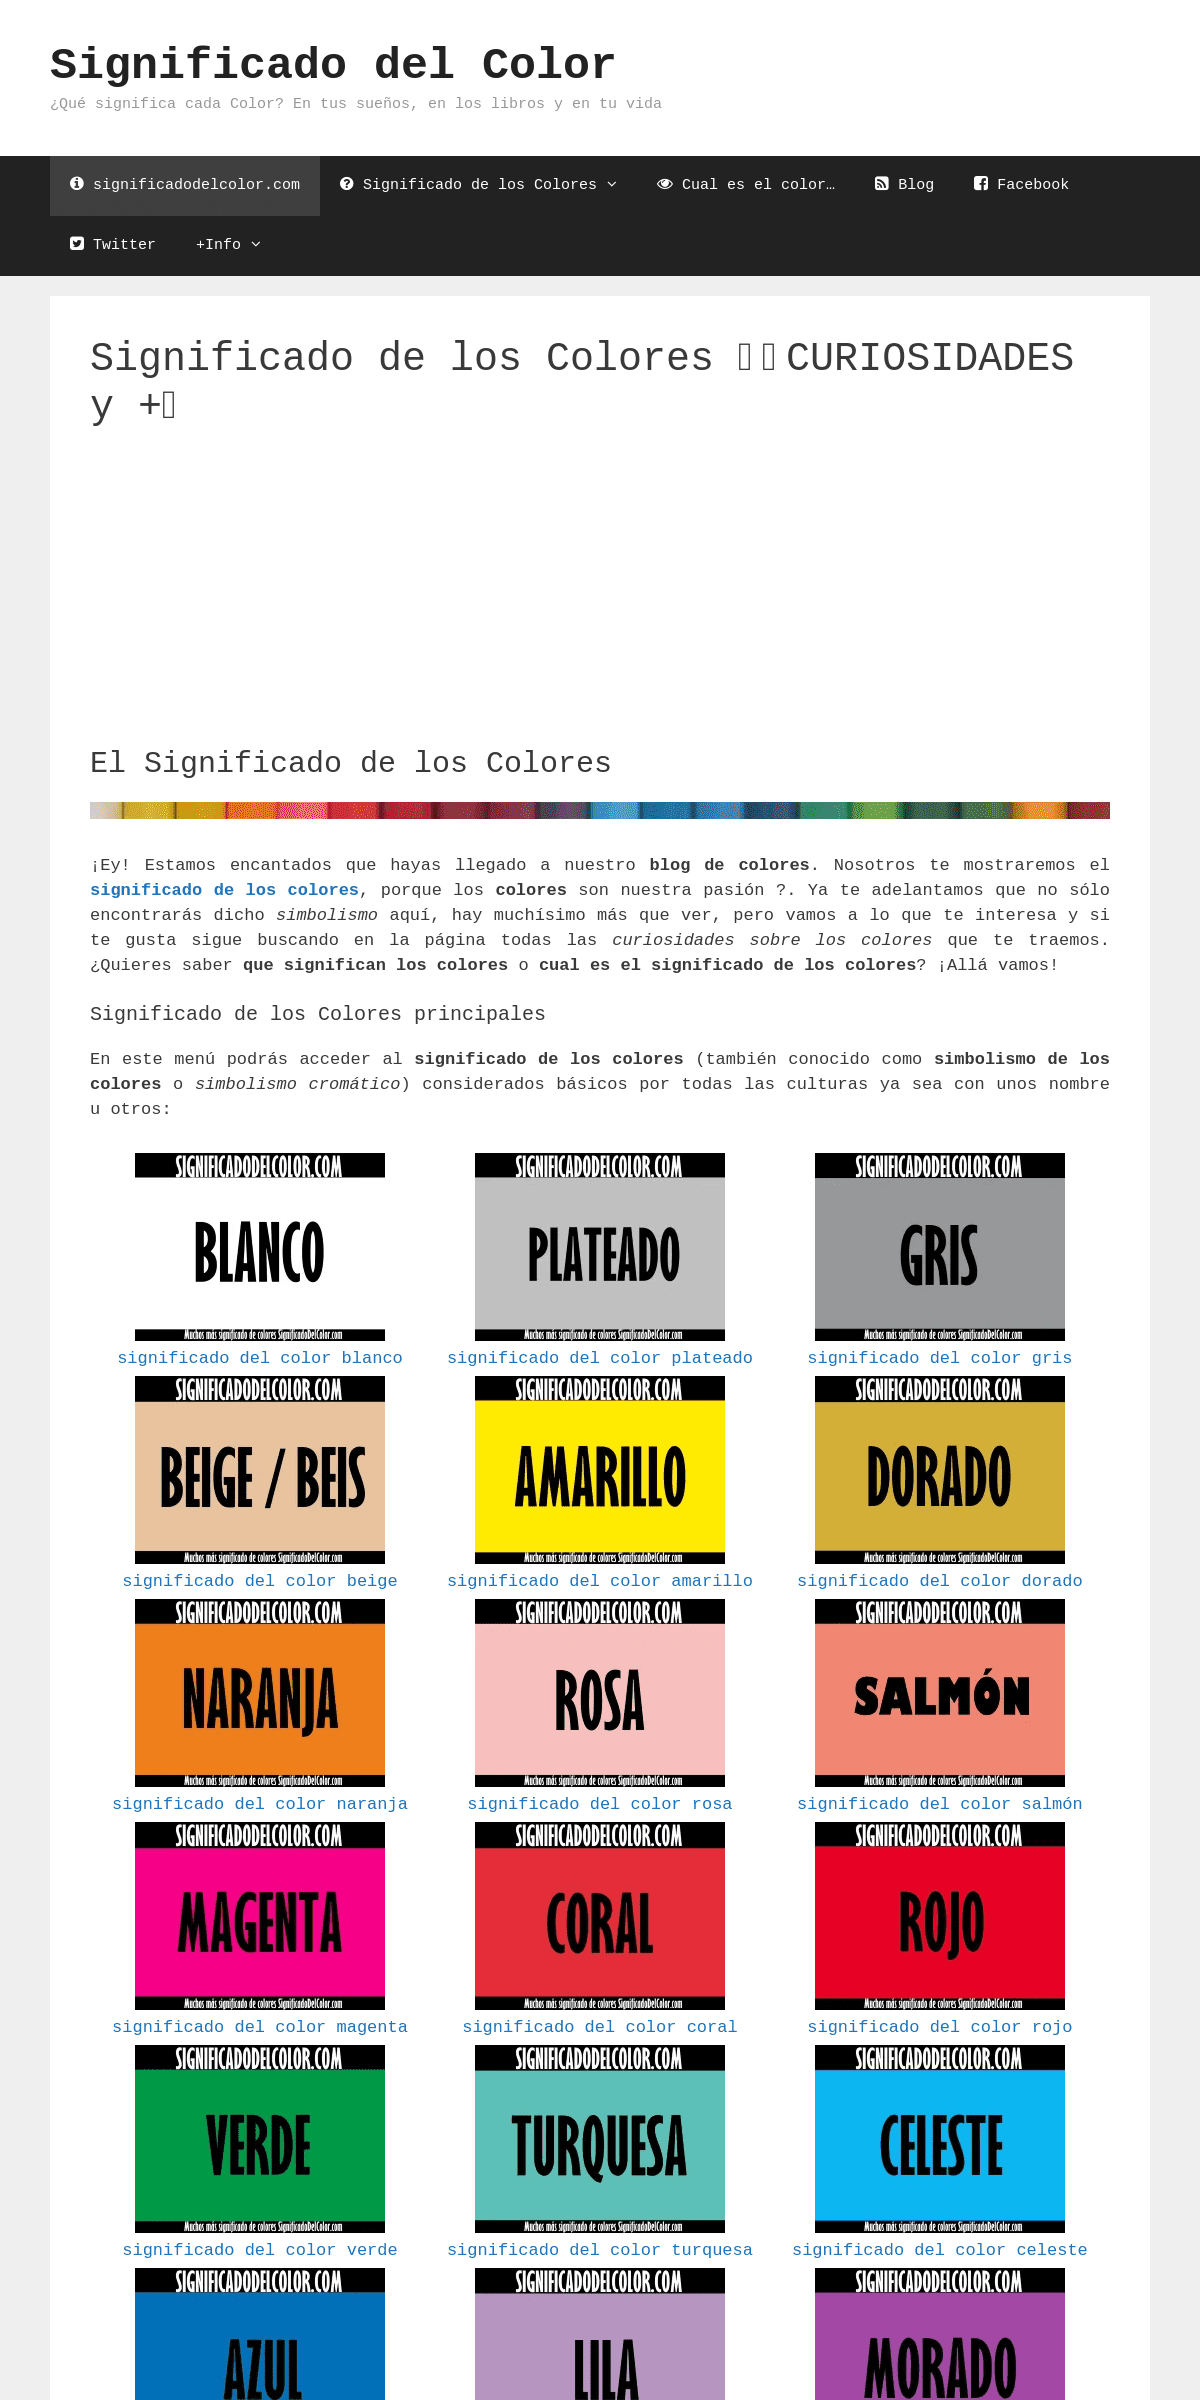 A complete backup of significadodelcolor.com